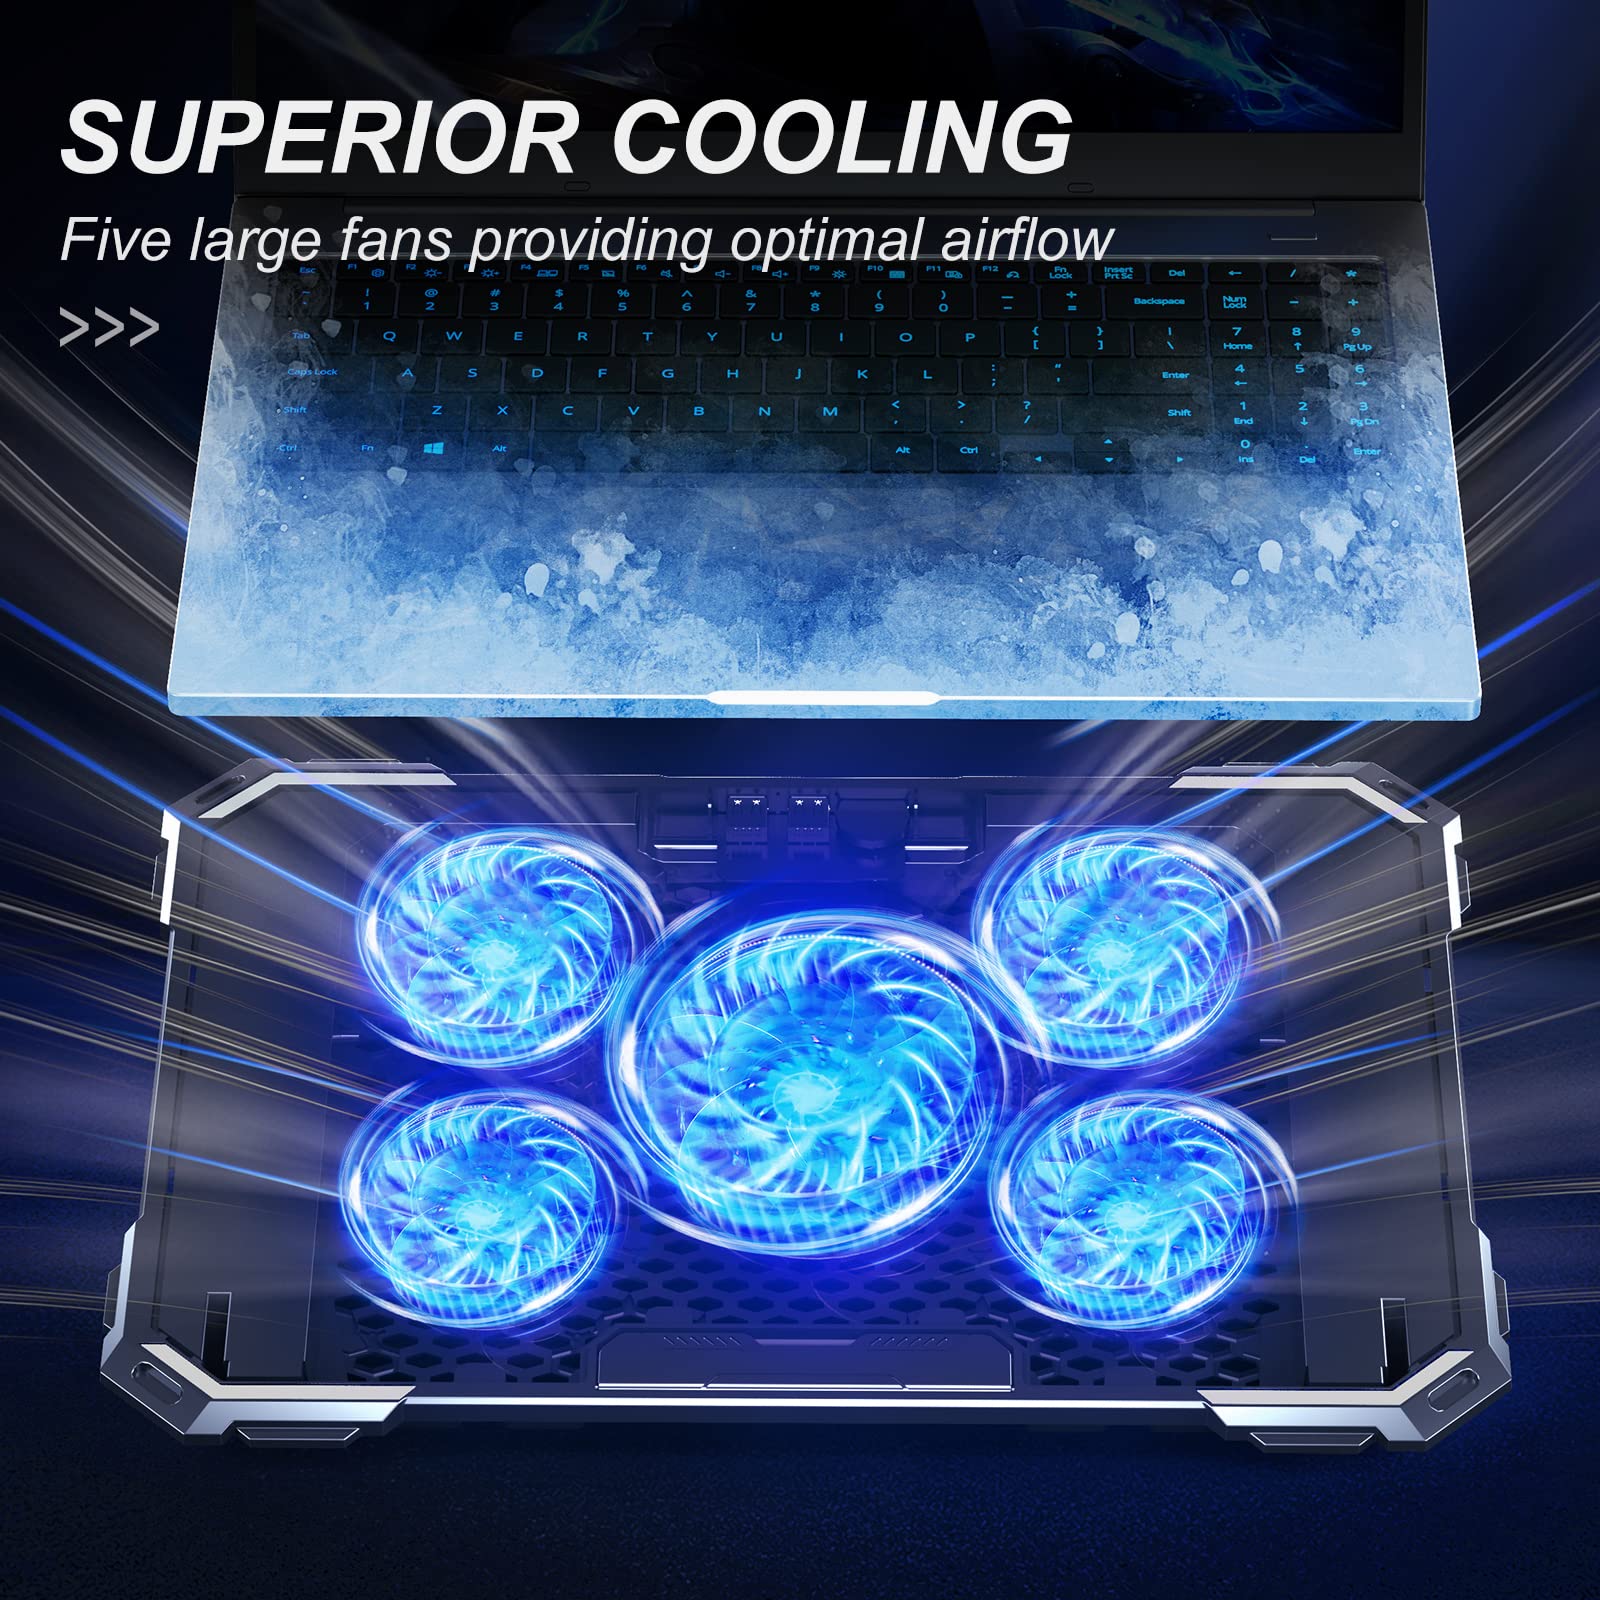 KYOLLY Upgrade Laptop Cooling Pad,Gaming Laptop Cooler with 5 Quiet Fans,2 USB Ports,5 Adjustable Stand Height,Blue LED Lights,for 15.6 Inch Laptops